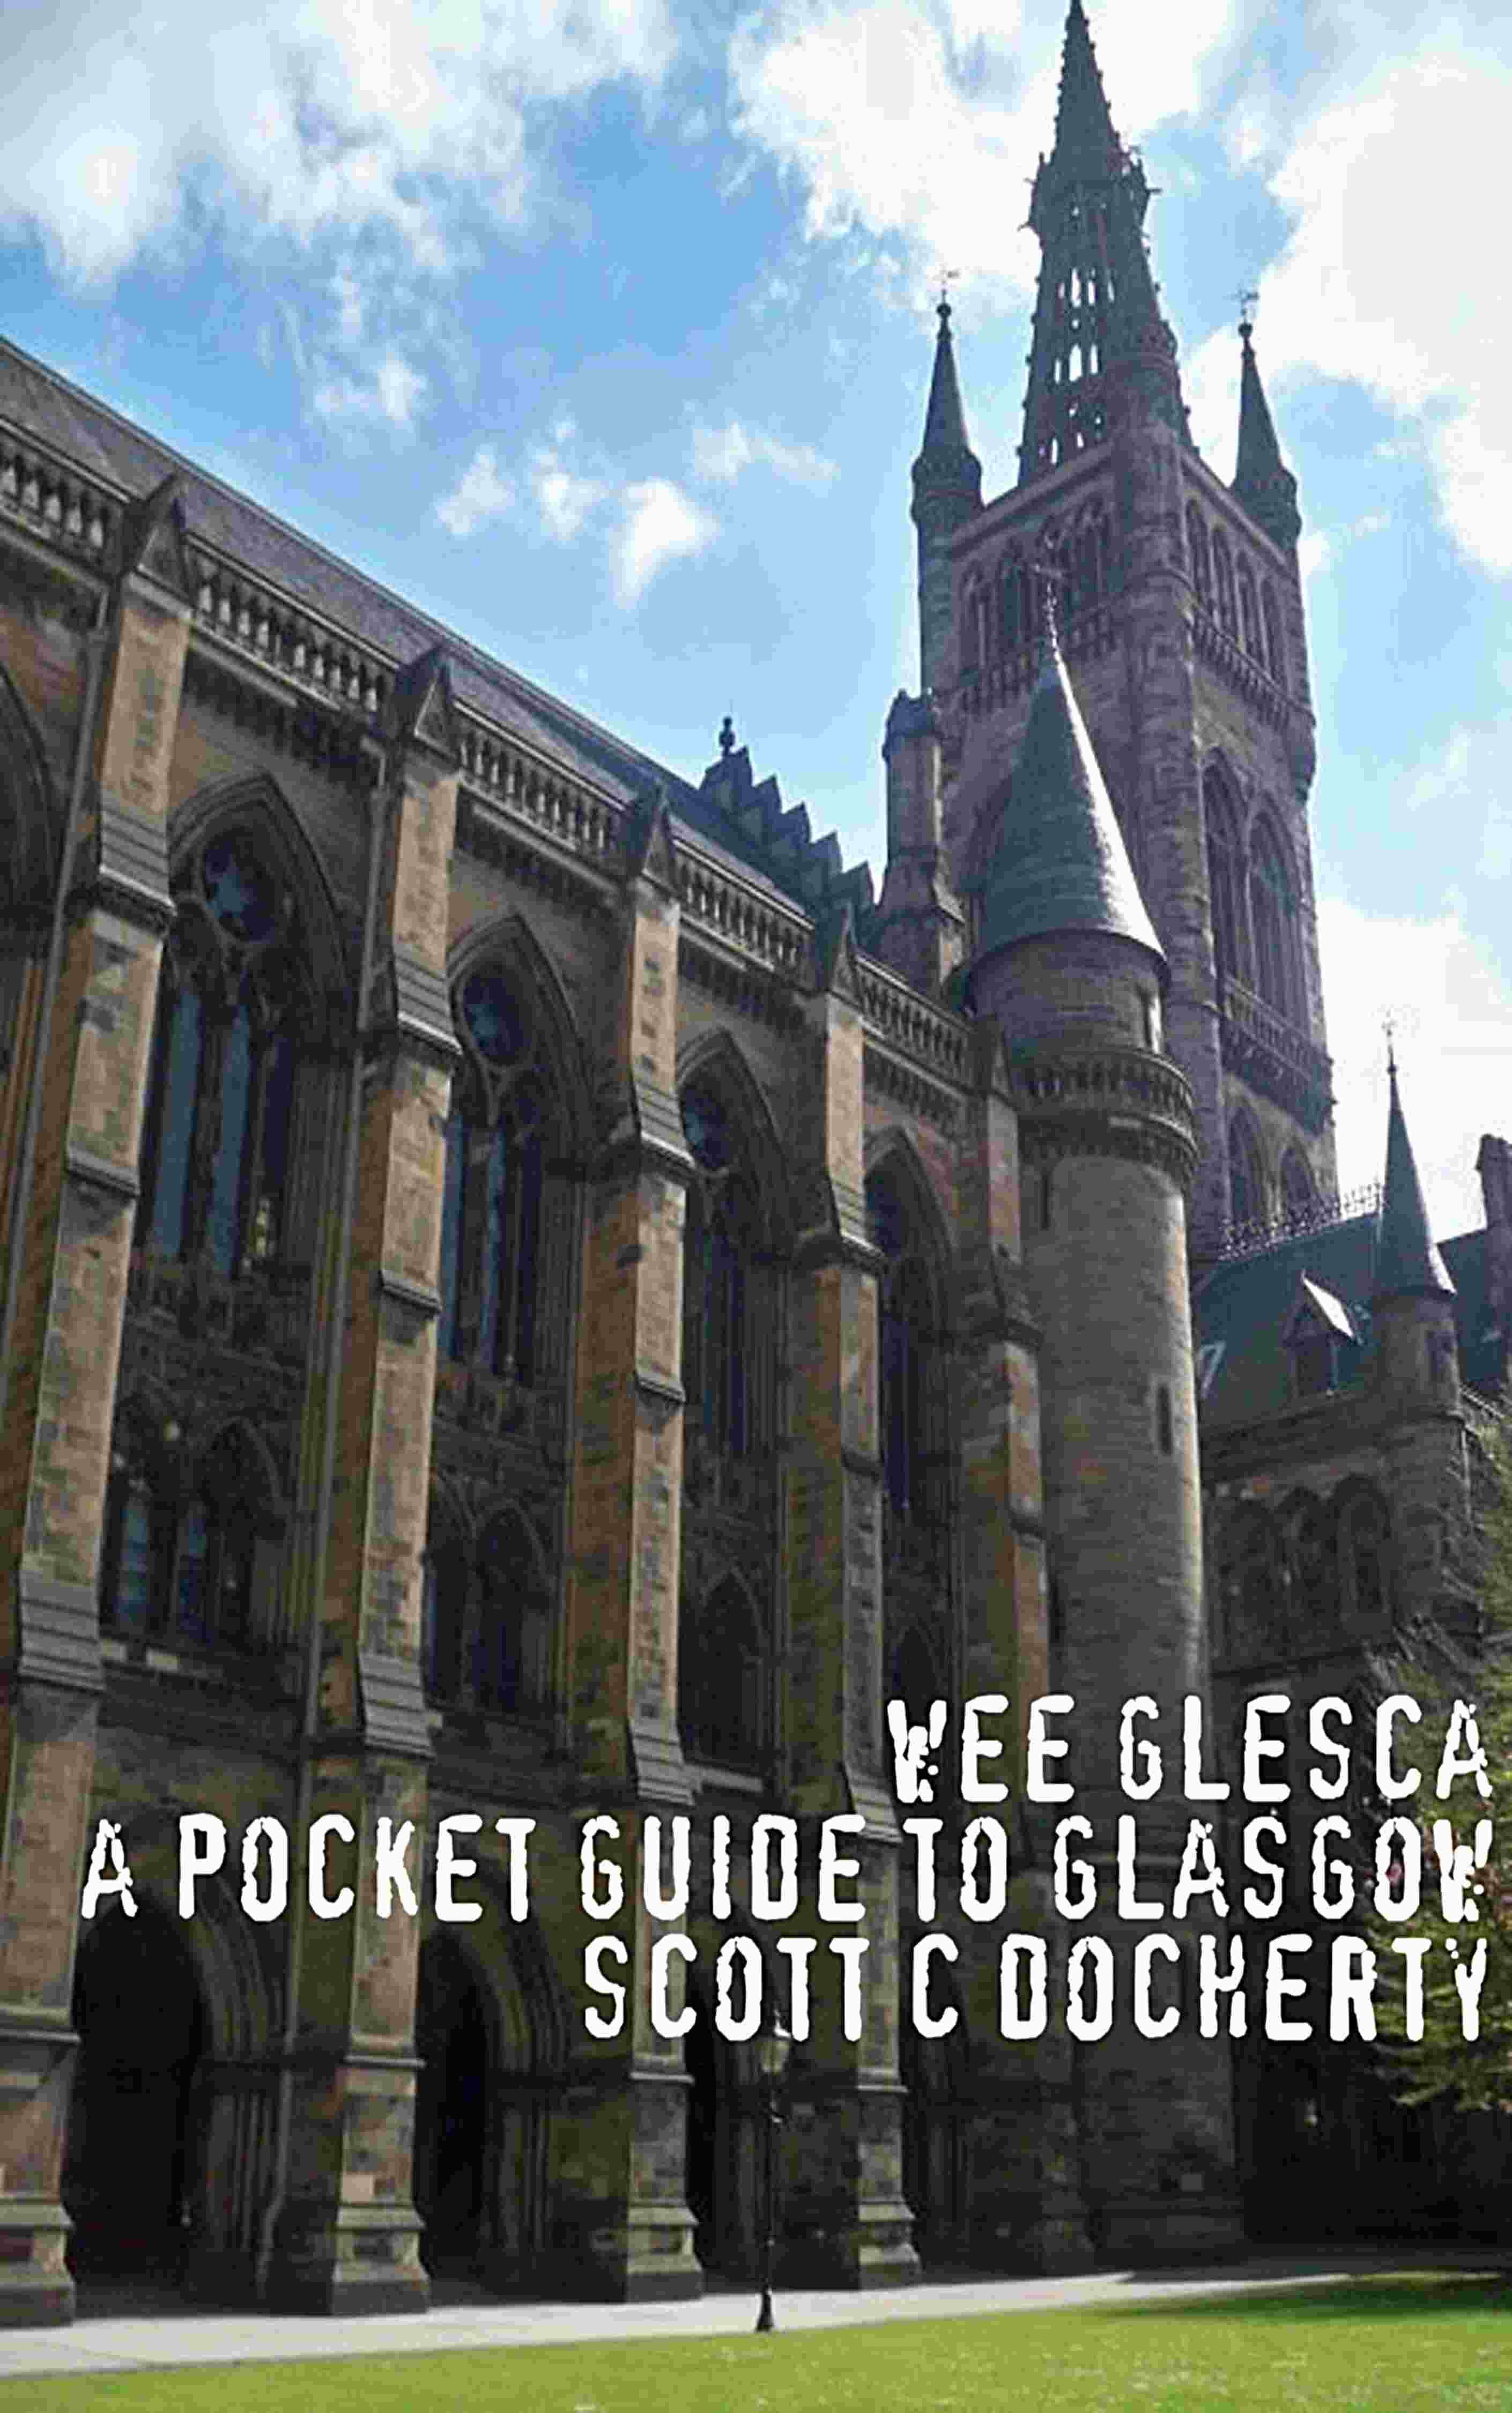 Wee Glesca Pocket Guide to Glasgow